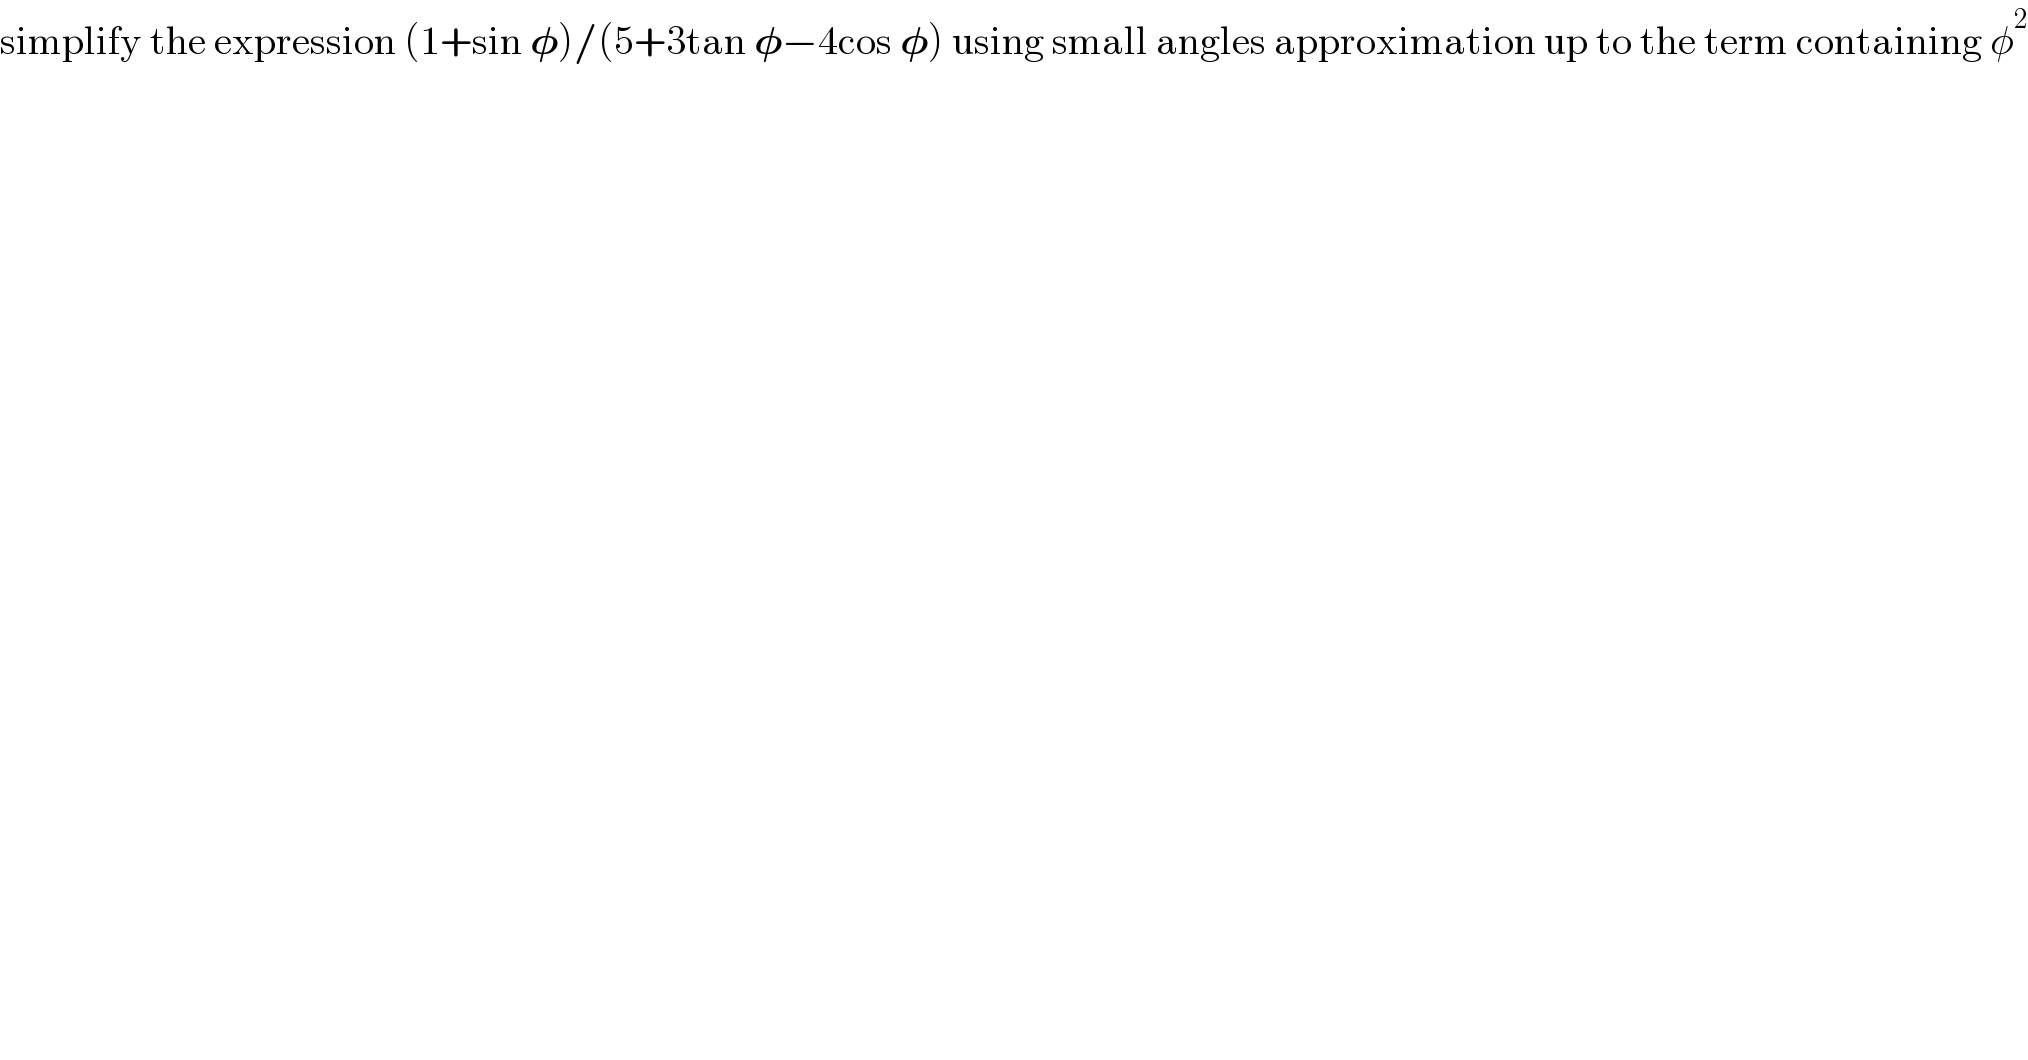 simplify the expression (1+sin 𝛗)/(5+3tan 𝛗−4cos 𝛗) using small angles approximation up to the term containing φ^2   